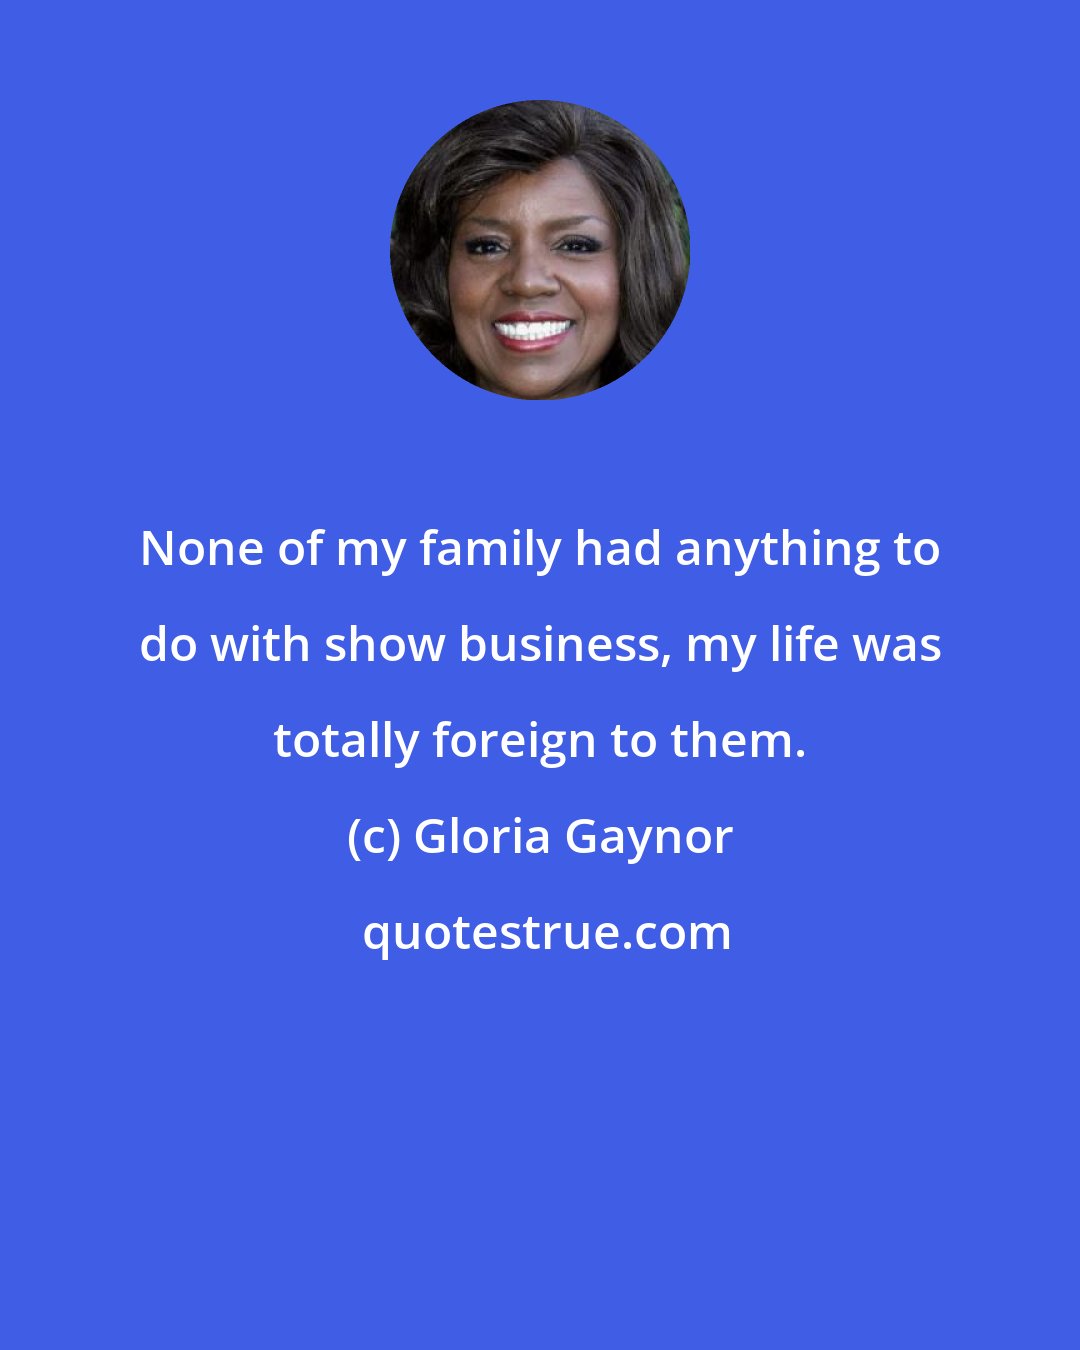 Gloria Gaynor: None of my family had anything to do with show business, my life was totally foreign to them.